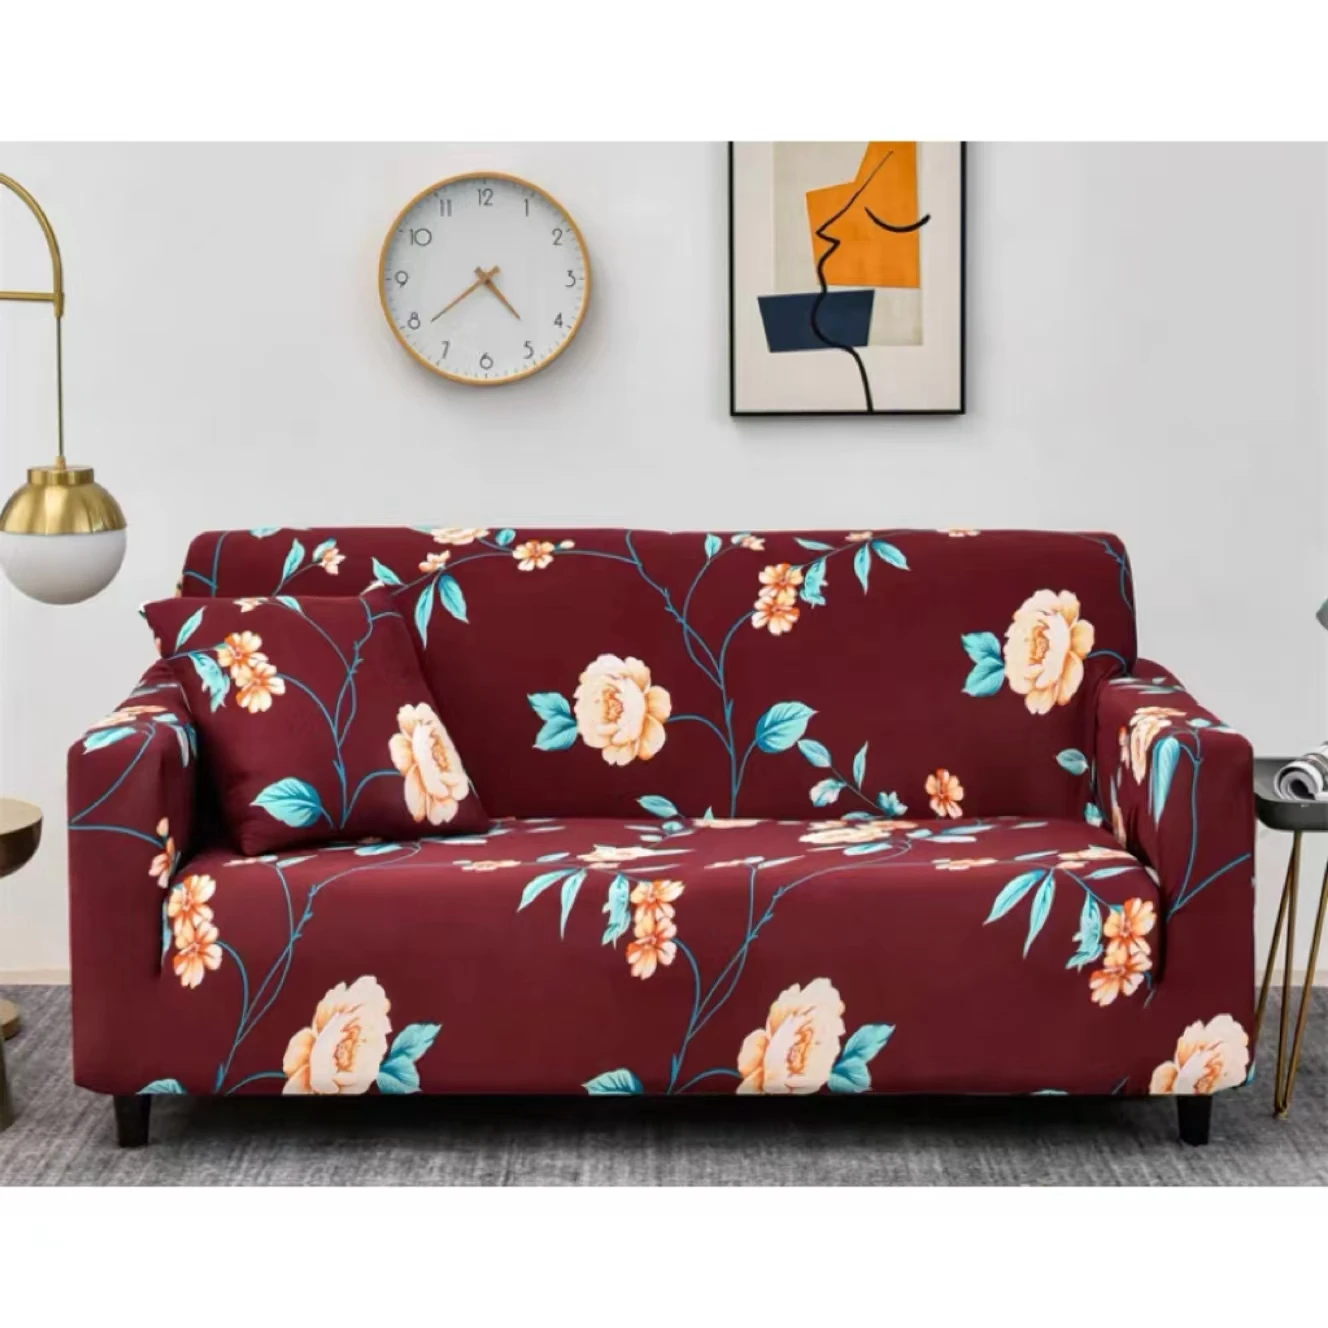 Hot Selling Flower Printing Sofa Covers Set Durable Elastic Stretch Sofa Slipcovers Removable Cover